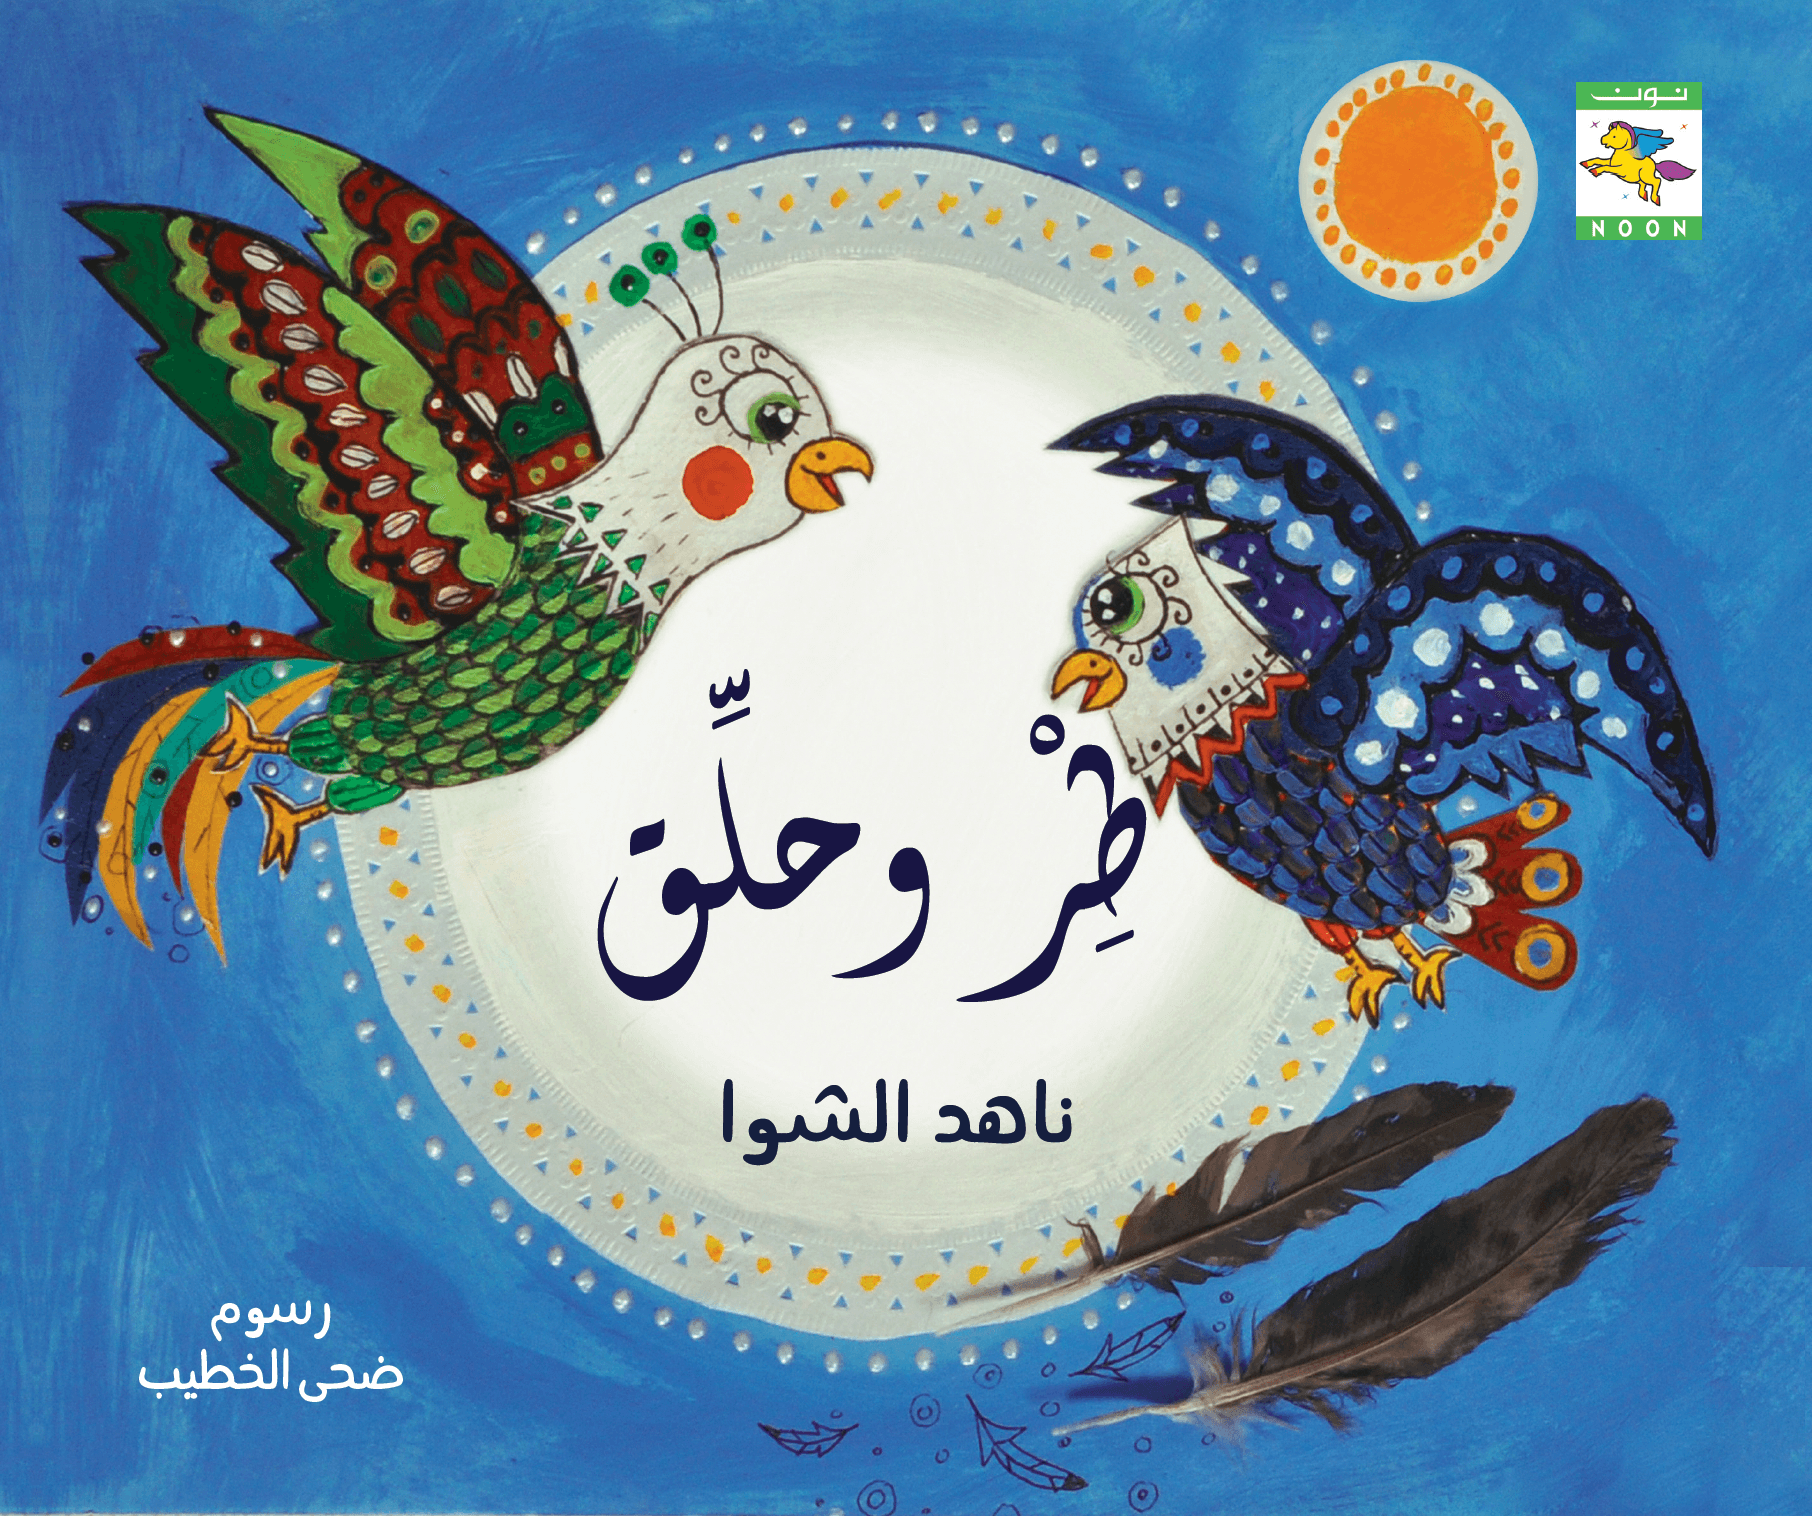 Fly and Soar High طر وحلق - Noon Books